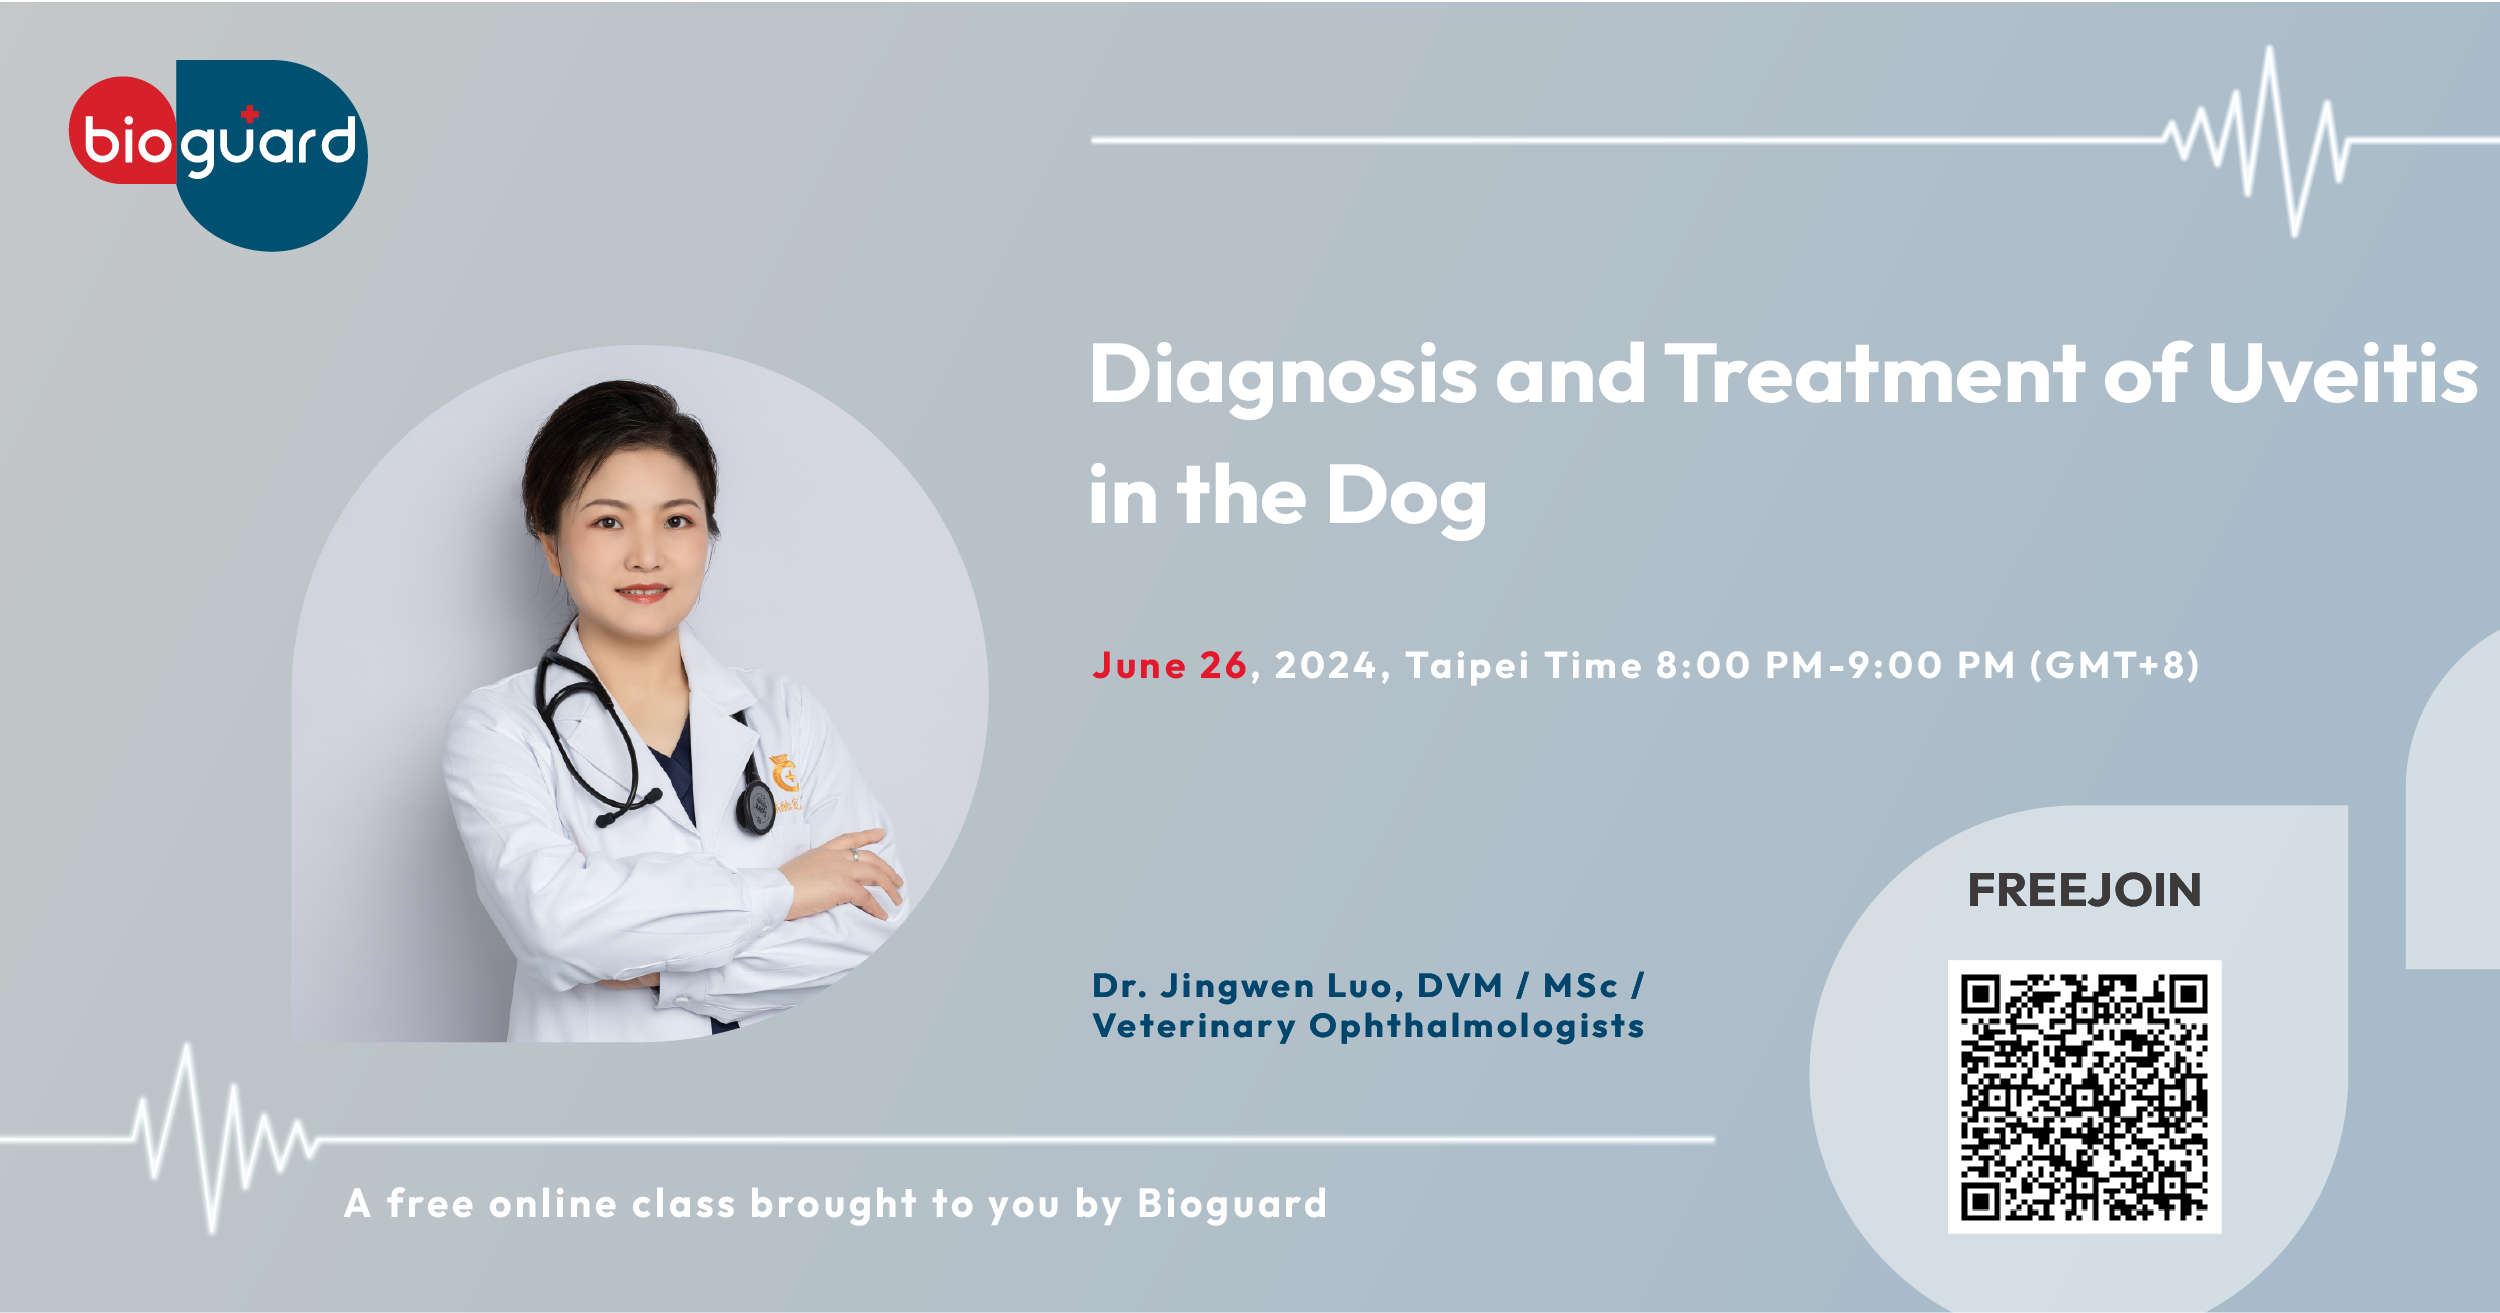 Diagnosis and Treatment of Uveitis in the Dog